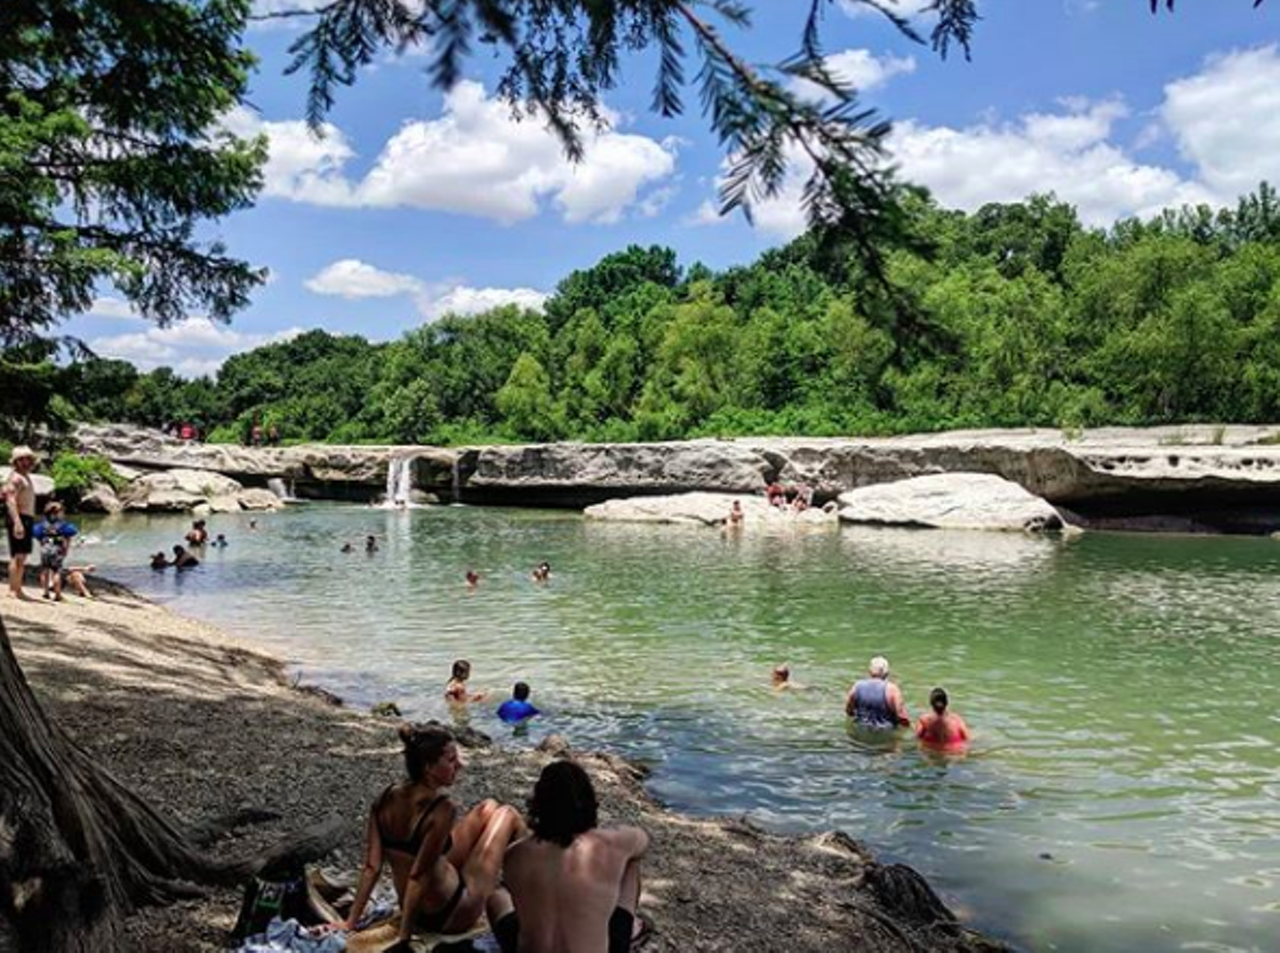 McKinney Falls State Park
5808 McKinney Falls Pkwy, Austin, (512) 243-1643, tpwd.texas.gov
The next time you head to Austin, make it a point to visit McKinney Falls. Located in Austin proper, the park offers pretty much all of the outdoorsy fun for the season. Camping, hiking, mountain biking, road biking, bouldering and geocaching are all up for grabs, or you can head to Onion Creek for fishing and swimming.
Photo via Instagram / tararosenbaum